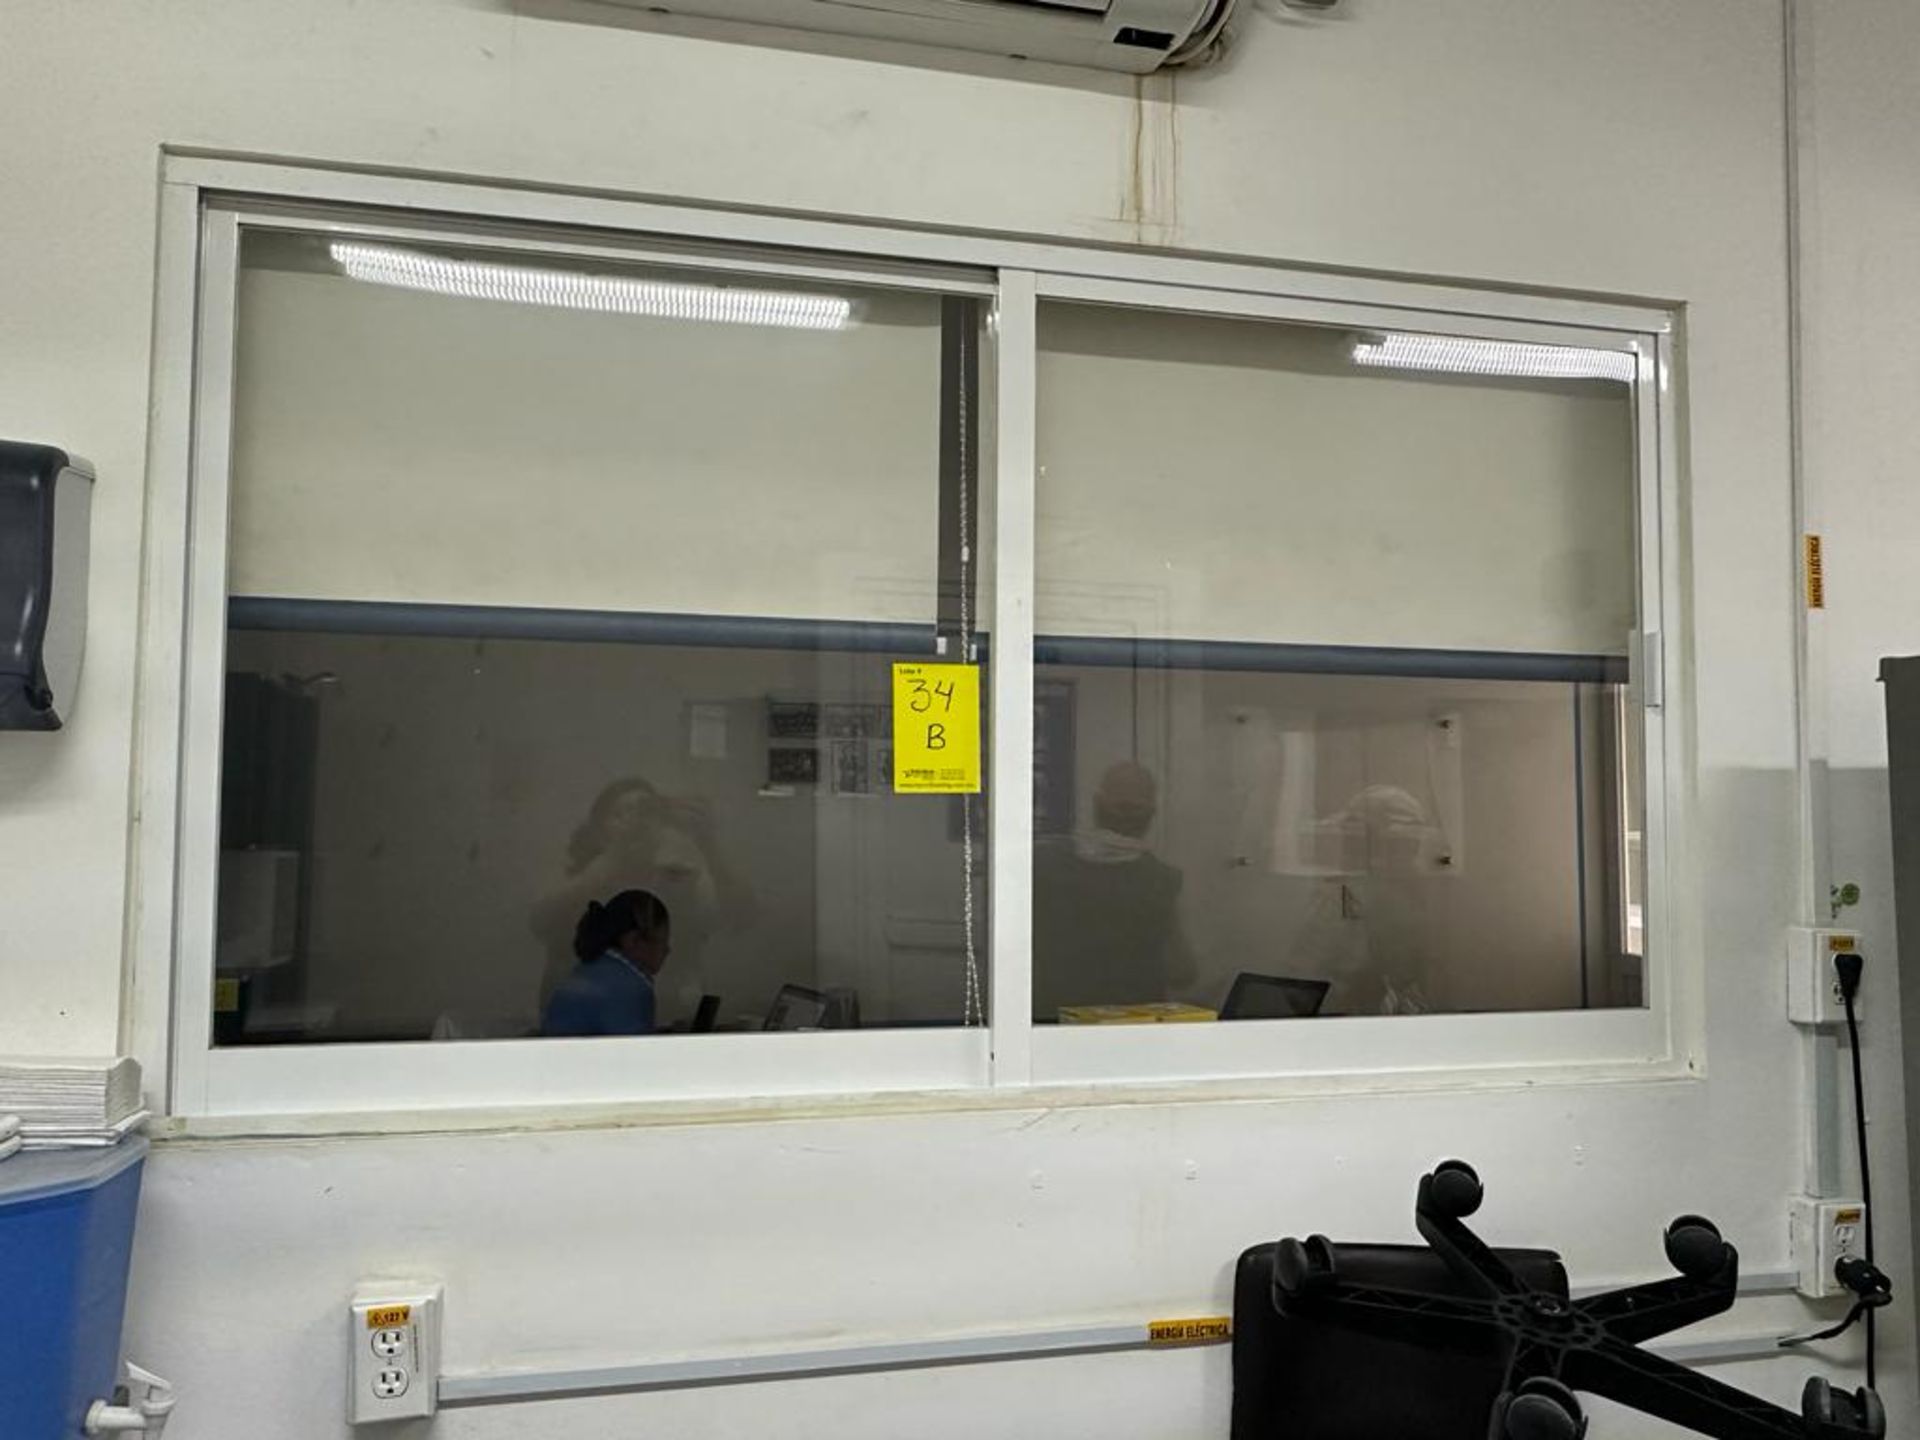 Lot consists of: 1 aluminum window with glass measures approximately 11.98 x 1.49 m; 1 aluminum - Image 11 of 26